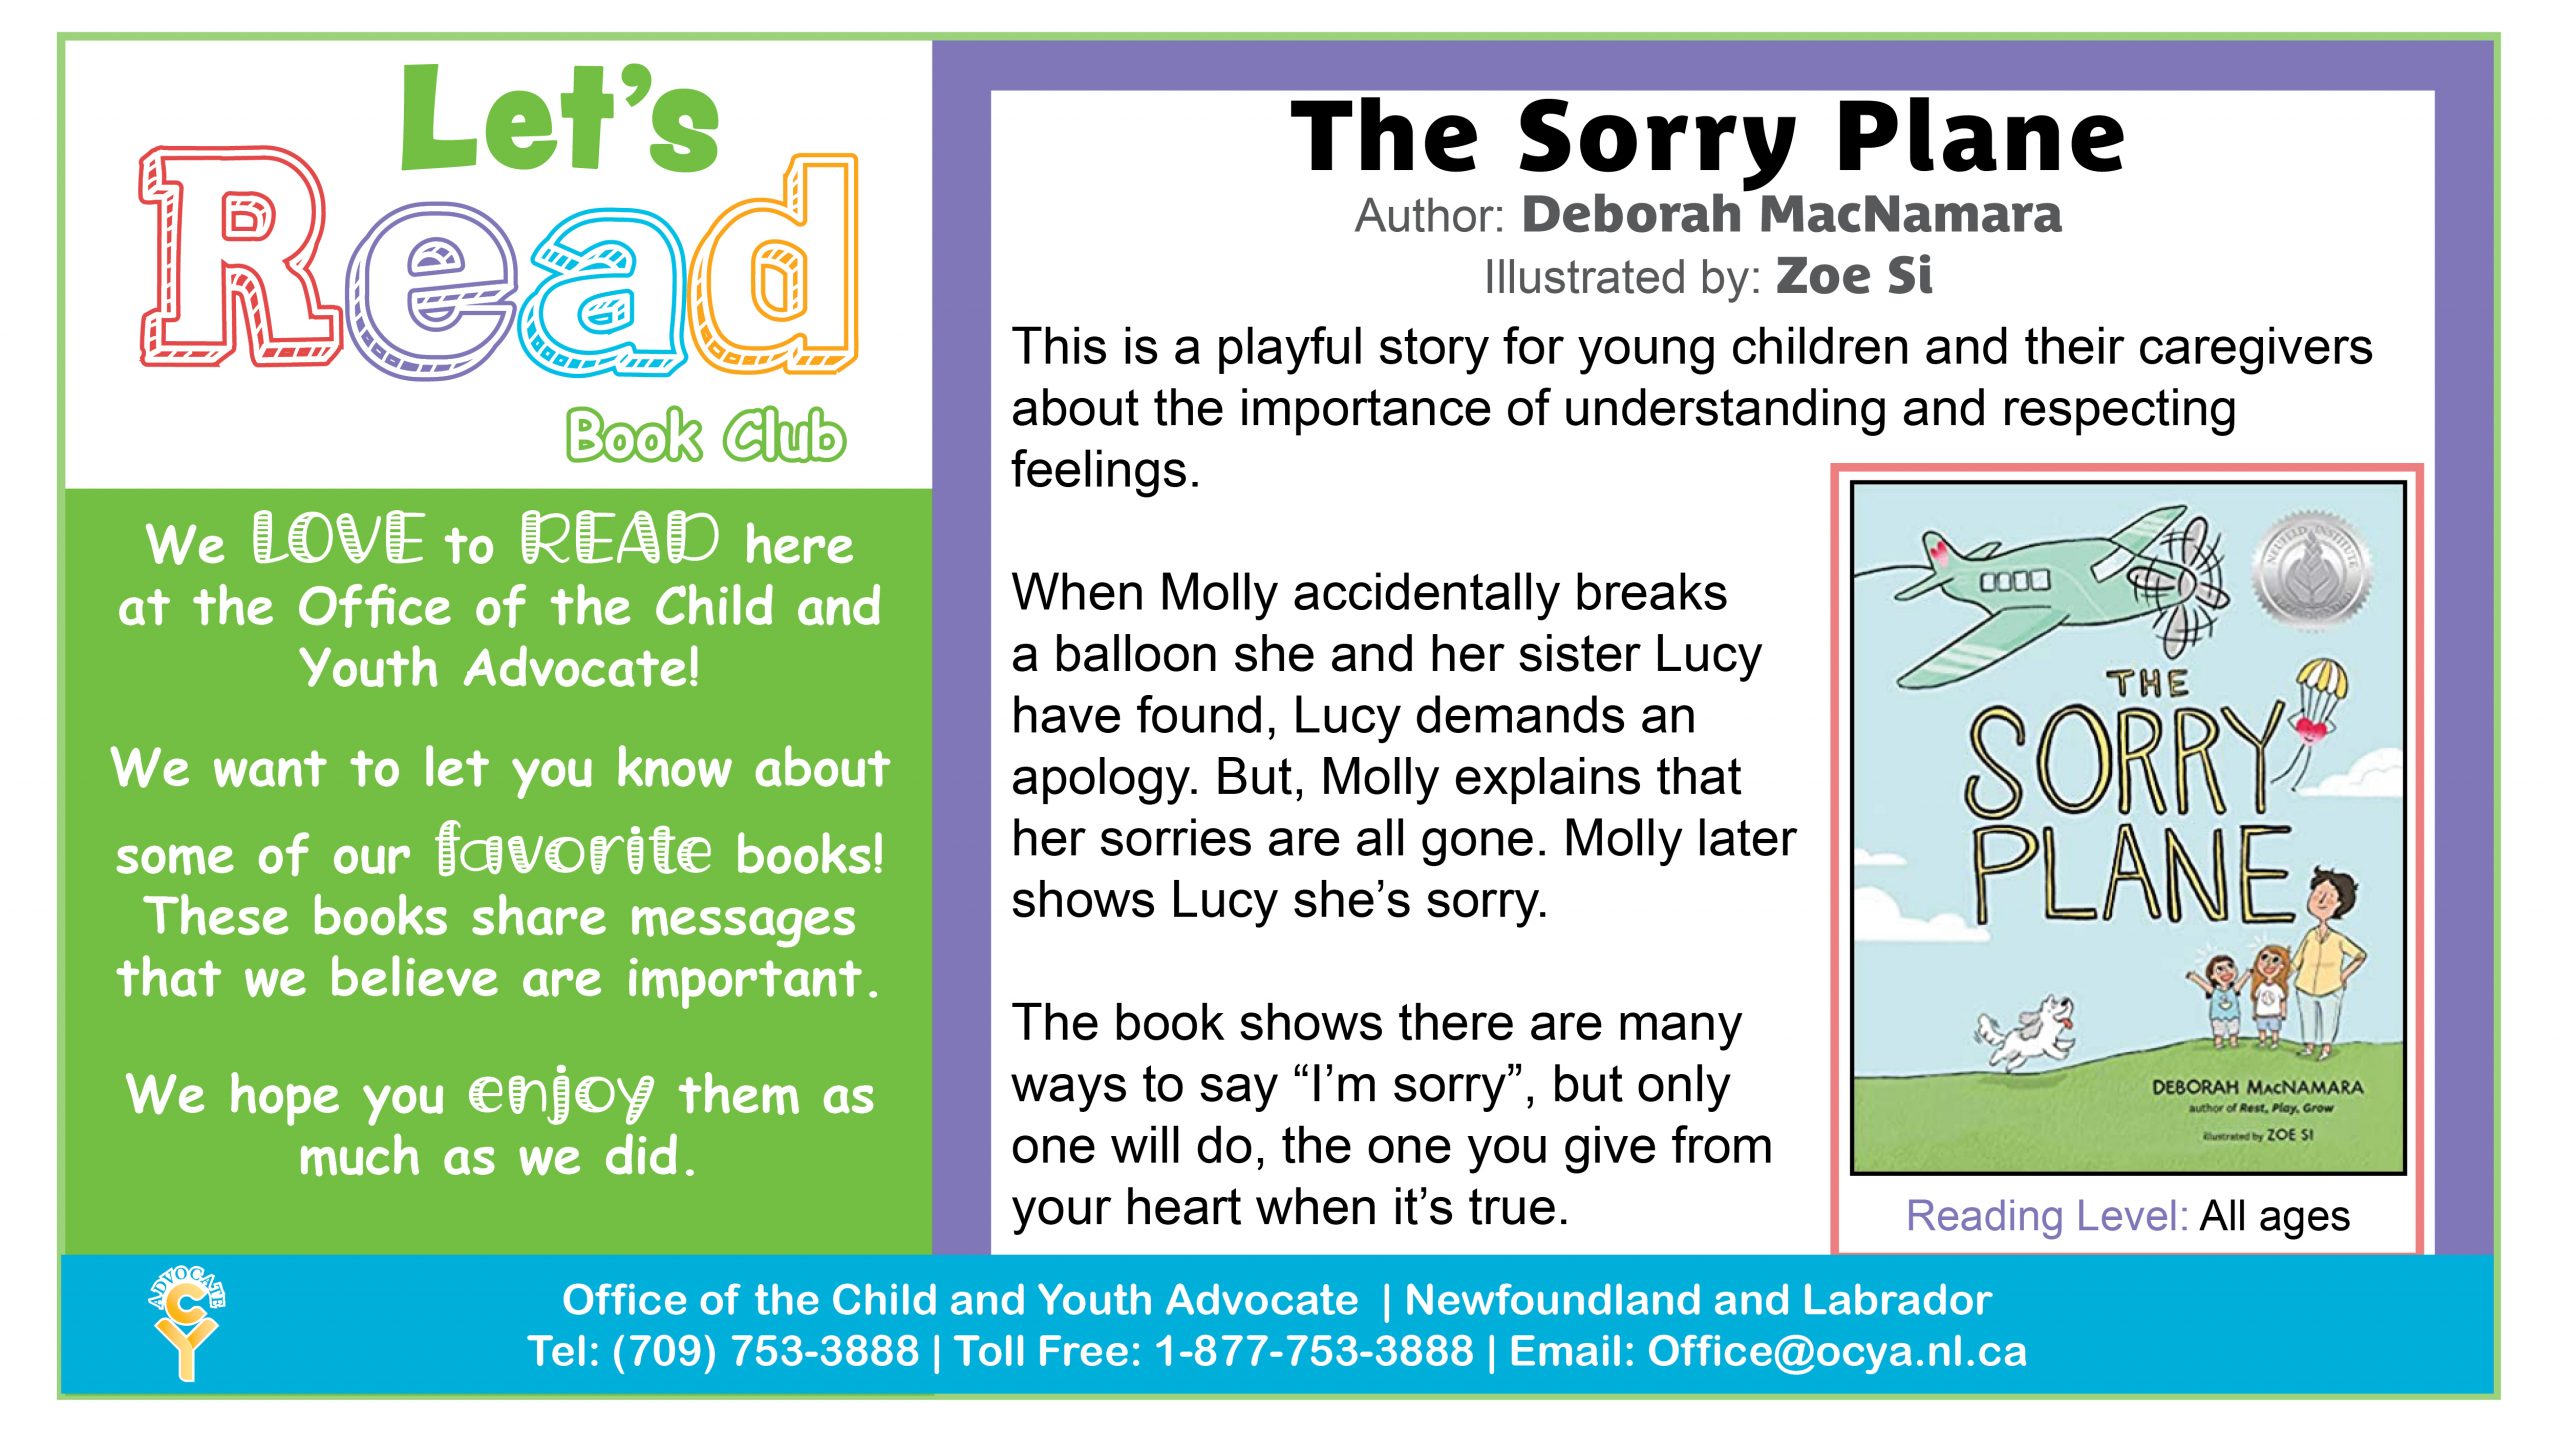 The Sorry Plane, by Deborah MacNamara. This is a playful story for young children and their caregivers about the importance of understanding and respecting feelings. When Molly accidentally breaks a balloon she and her sister Lucy have found, Lucy demands an apology. But, Molly explains that her sorries are all gone. Molly later shows Lucy she's sorry. The book shows there are many ways to say 